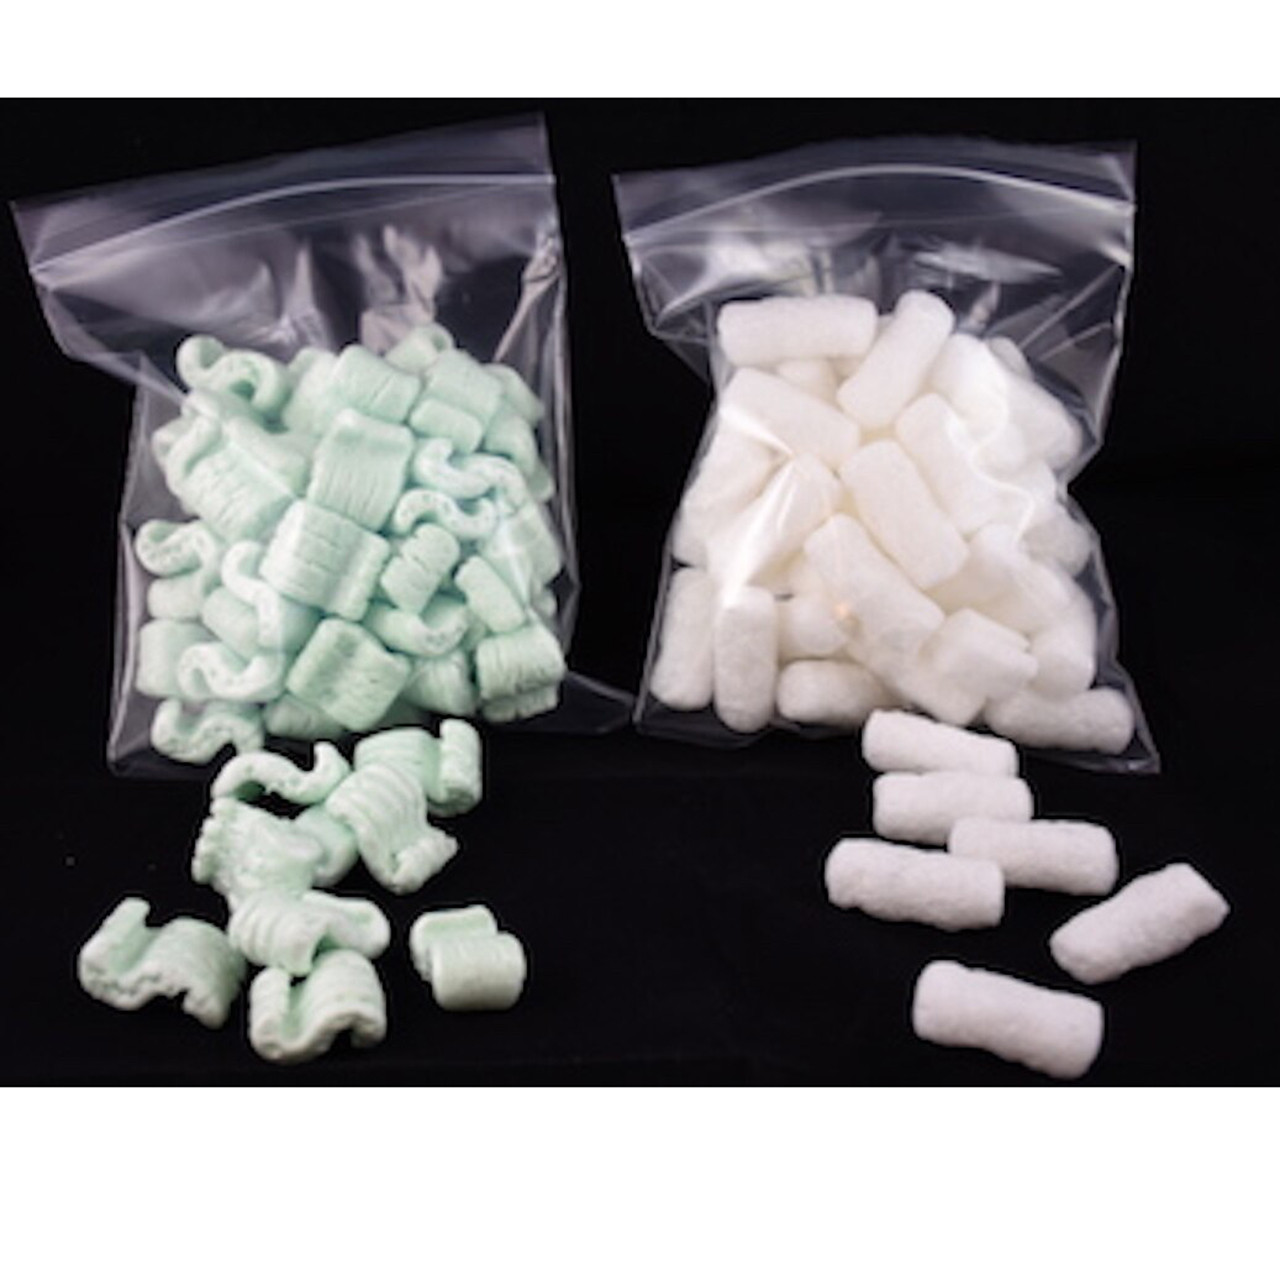 5 Uses for Foam Packing Peanuts